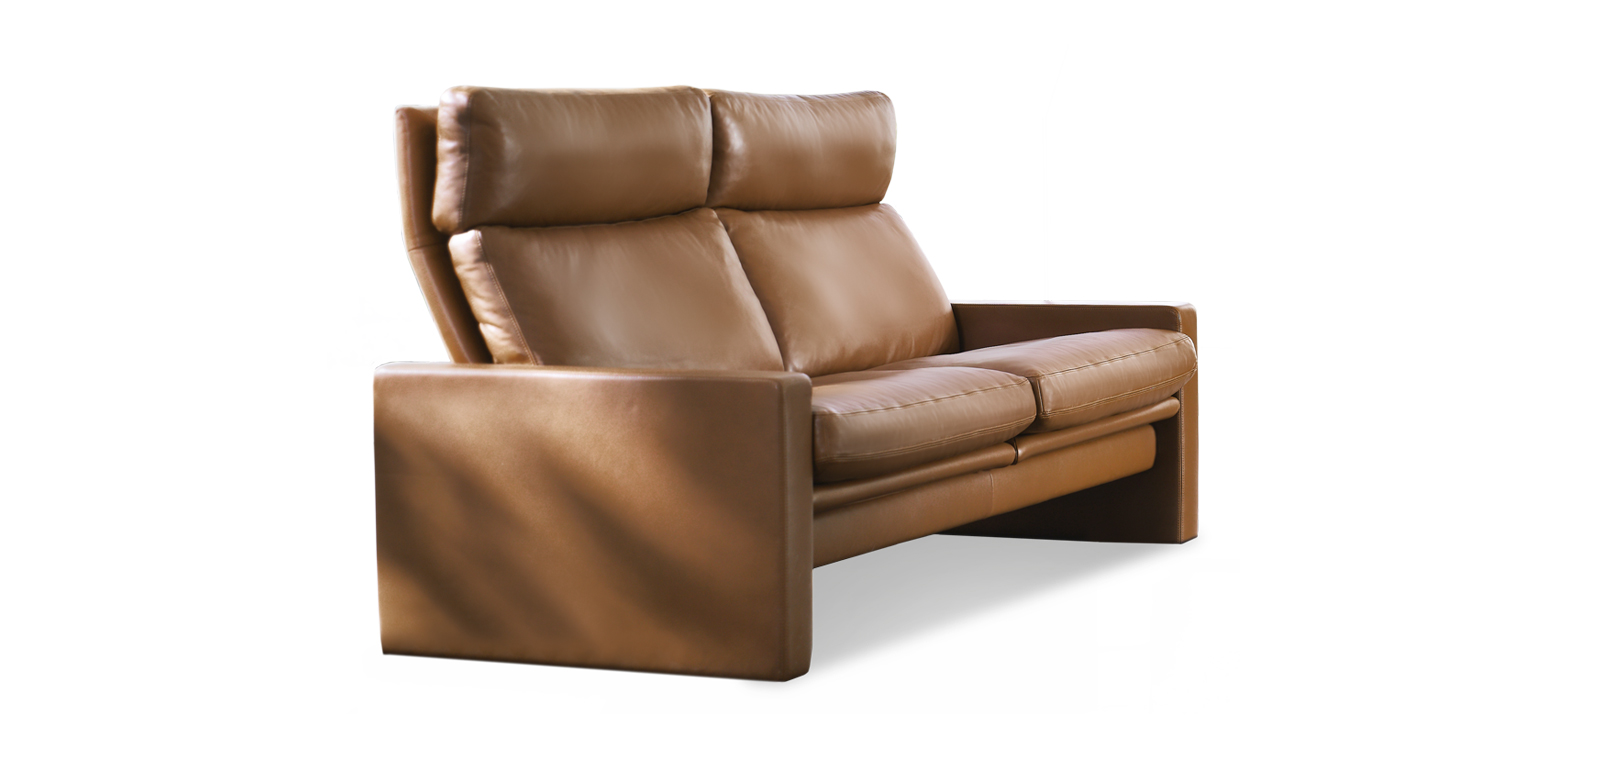 A play of intersecting vertical and horizontal lines is offered by the high-quality Manhattan designer sofa. The slender cheeks join the finely designed substructure to the comfortable cushion structure and lend it a modern practicality that opens up space for your own living ideas. The headrests and optional armrest cushions make Manhattan a master of flexibility among designer sofas.